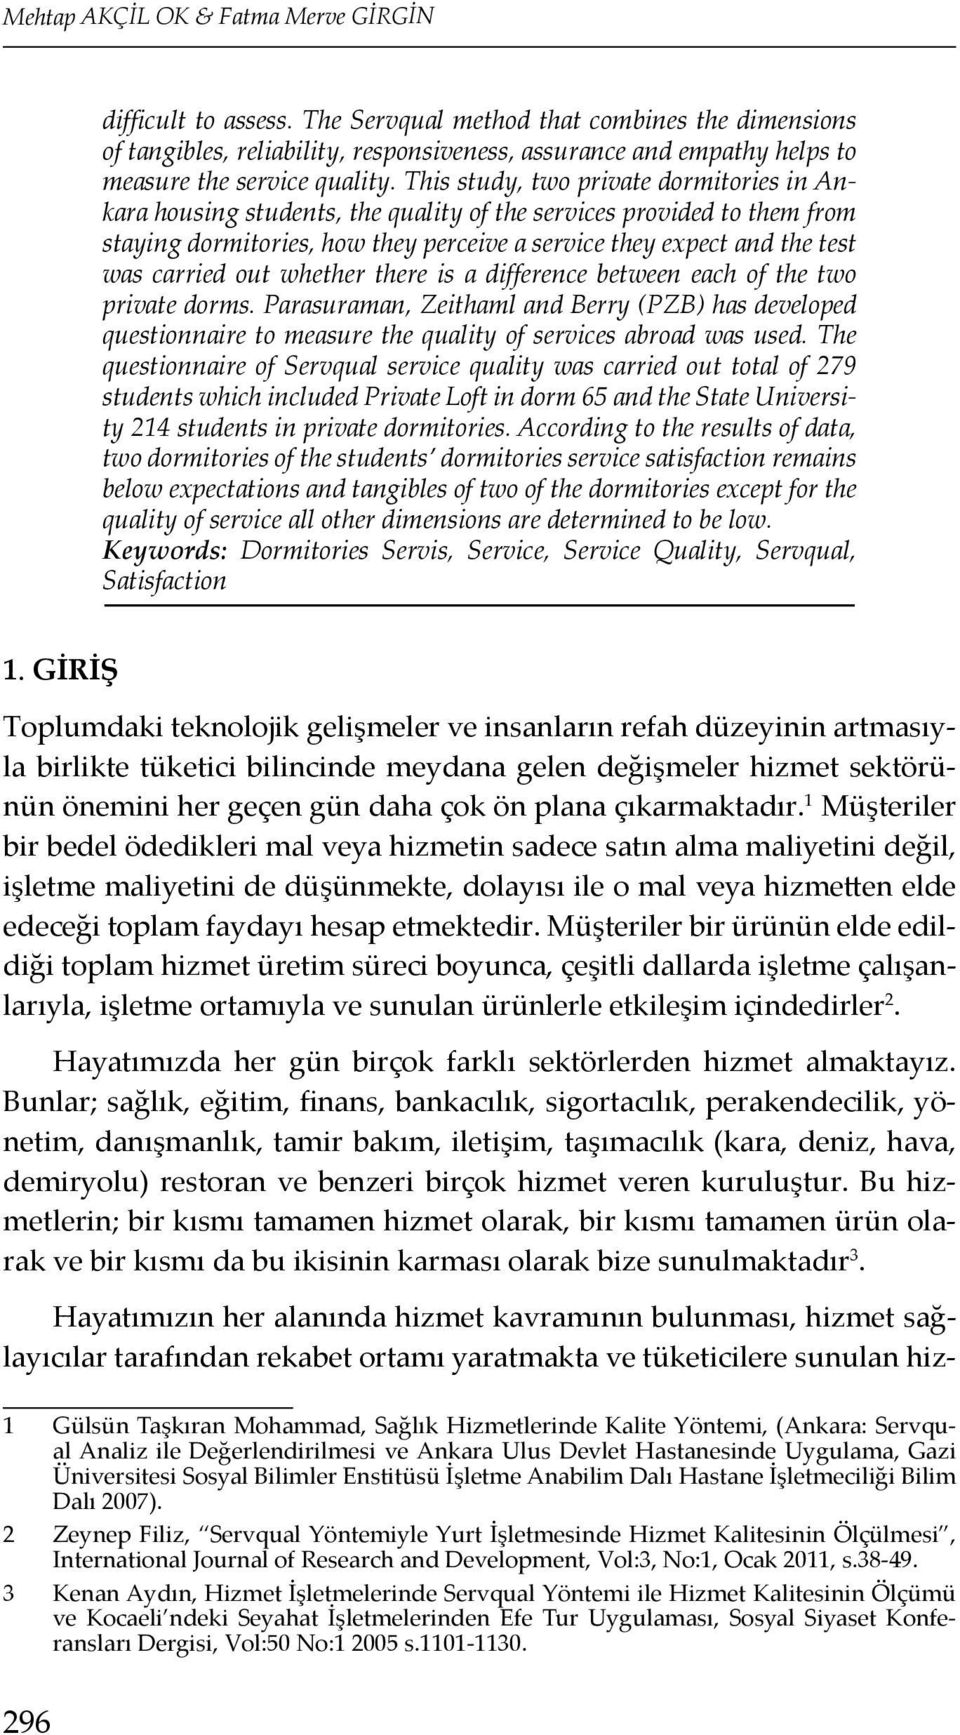 This study, two private dormitories in Ankara housing students, the quality of the services provided to them from staying dormitories, how they perceive a service they expect and the test was carried